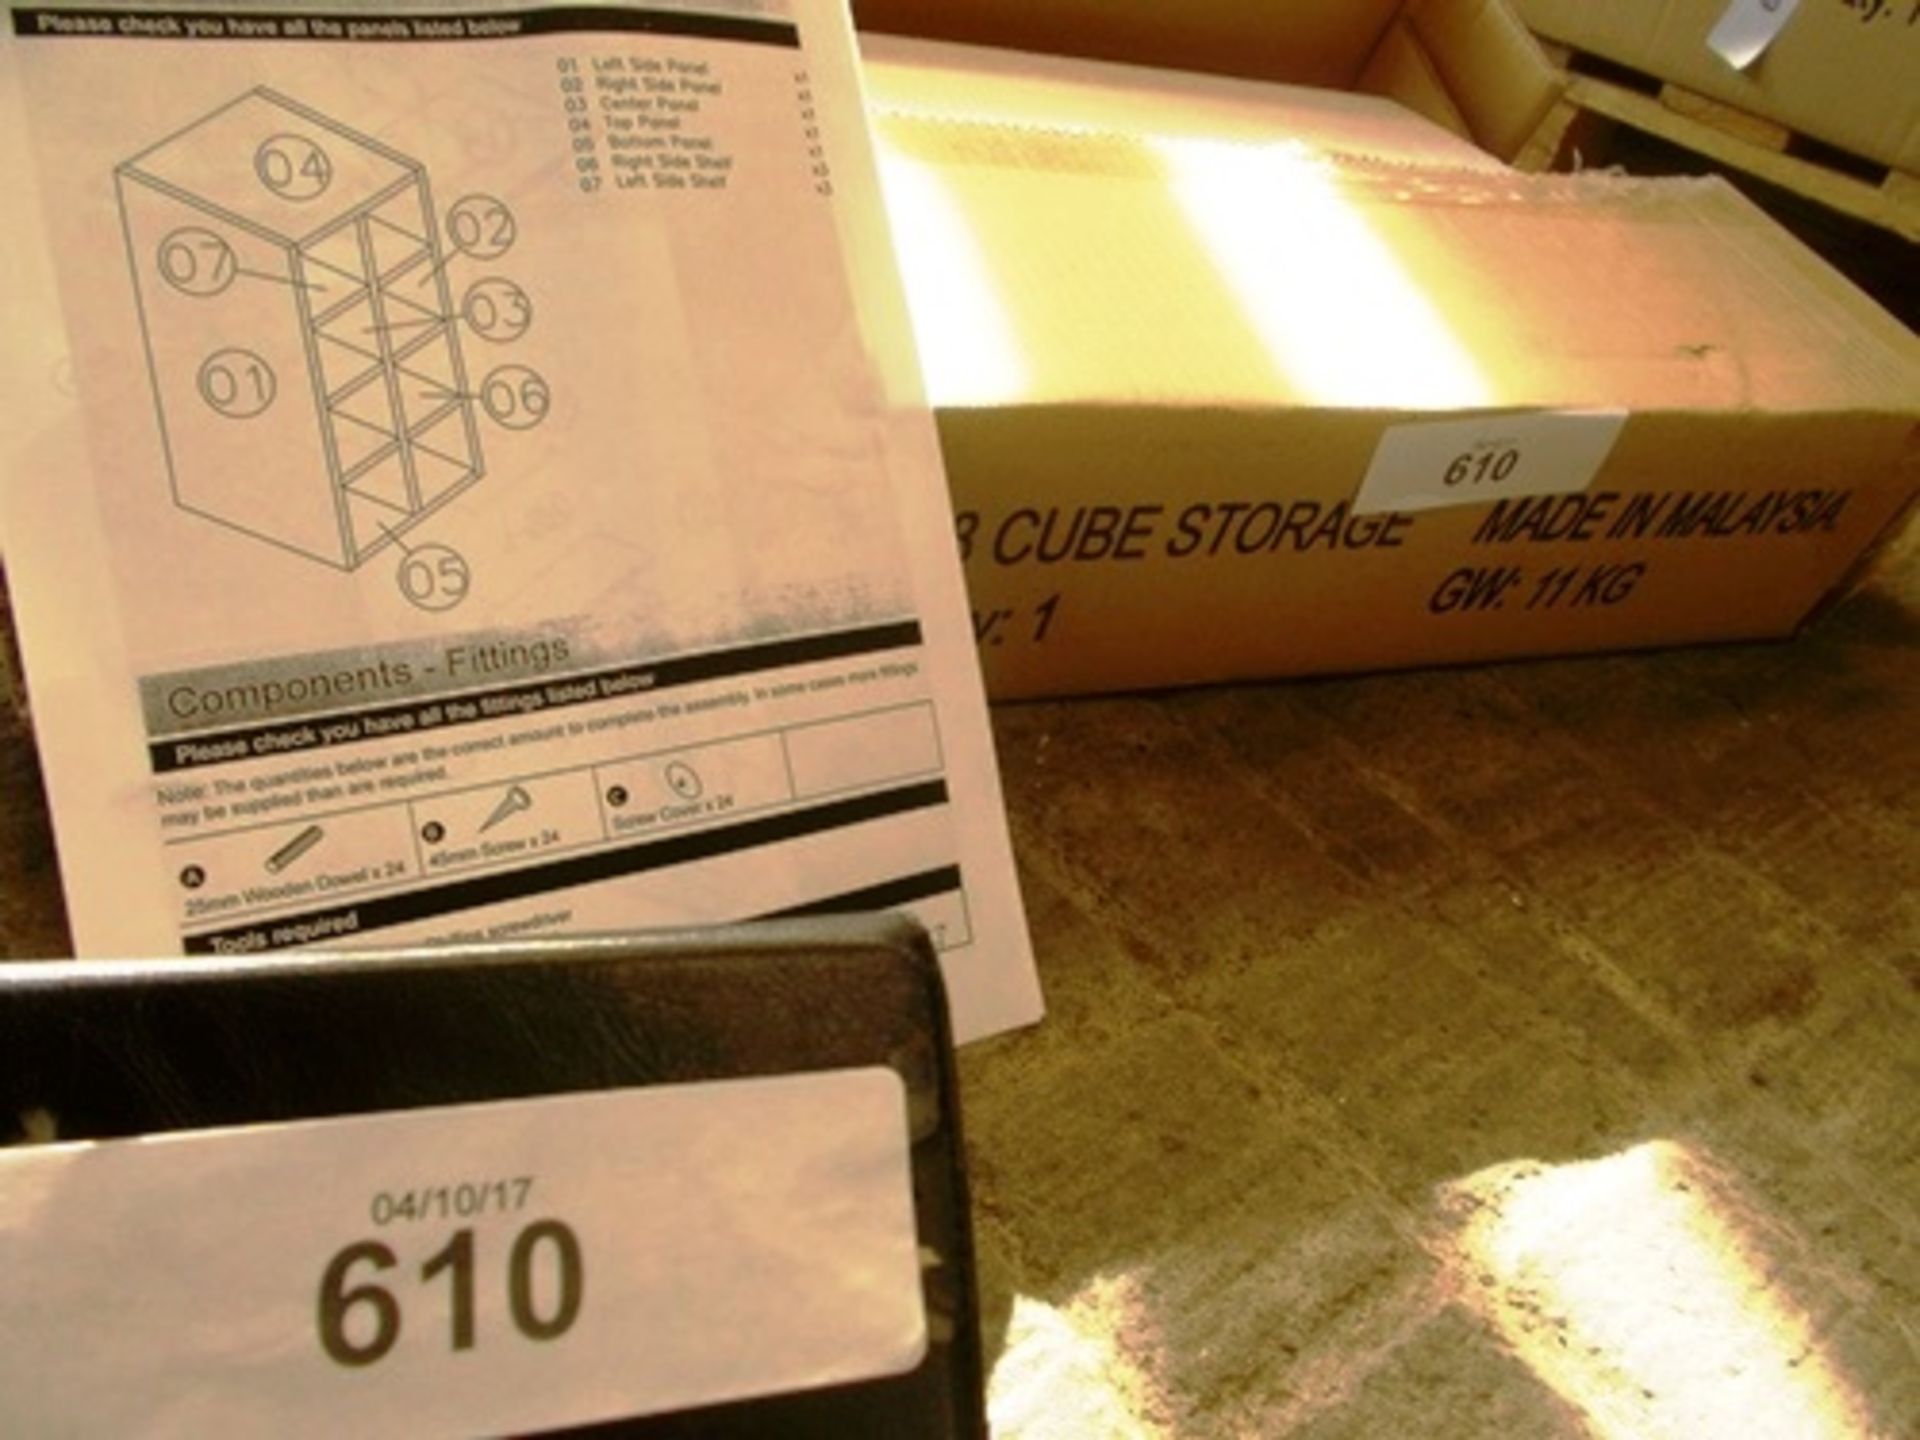 An 8 cube storage unit, model 646411 - New in box, box open (Pallet7)